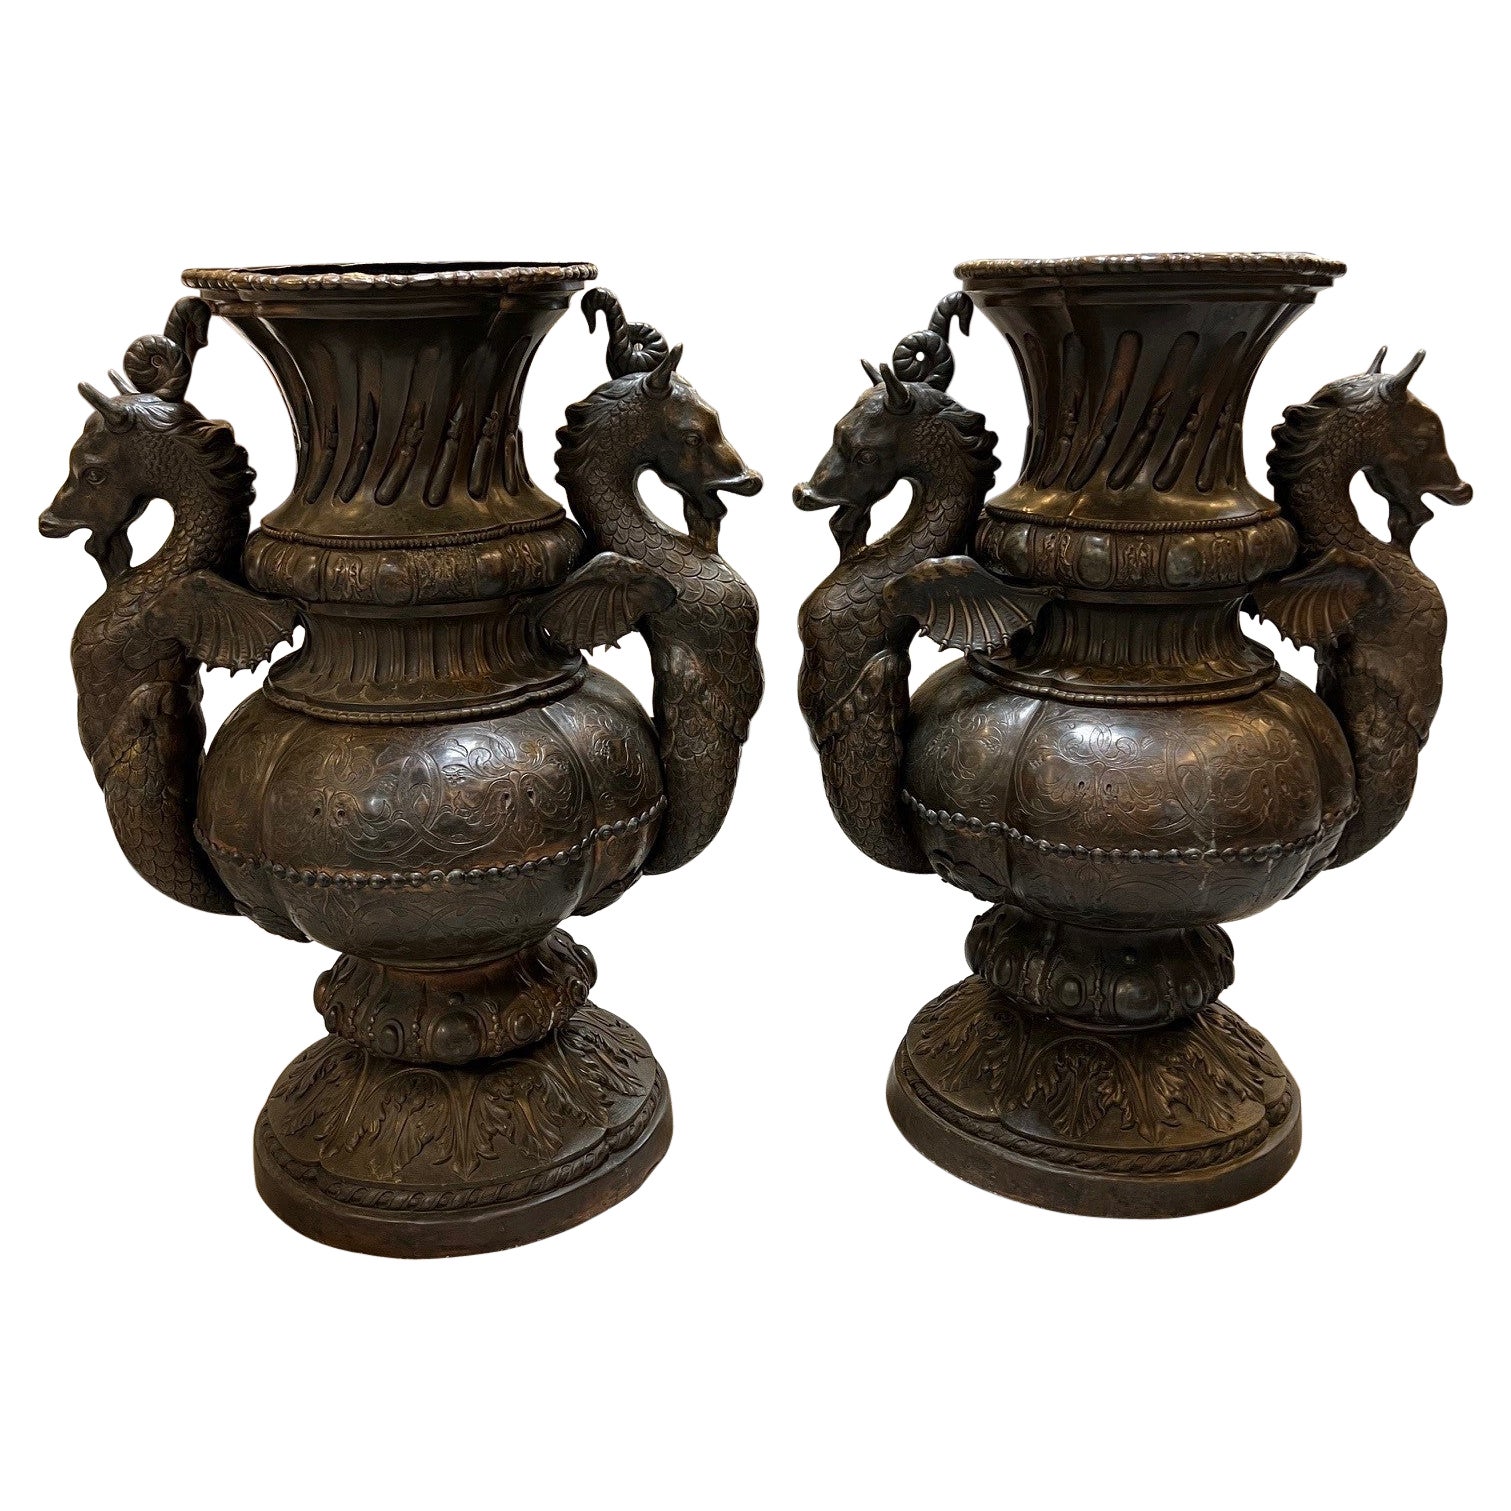 Pair of Antique Handcrafted Copper Urns with Mythological Seahorse Handles  